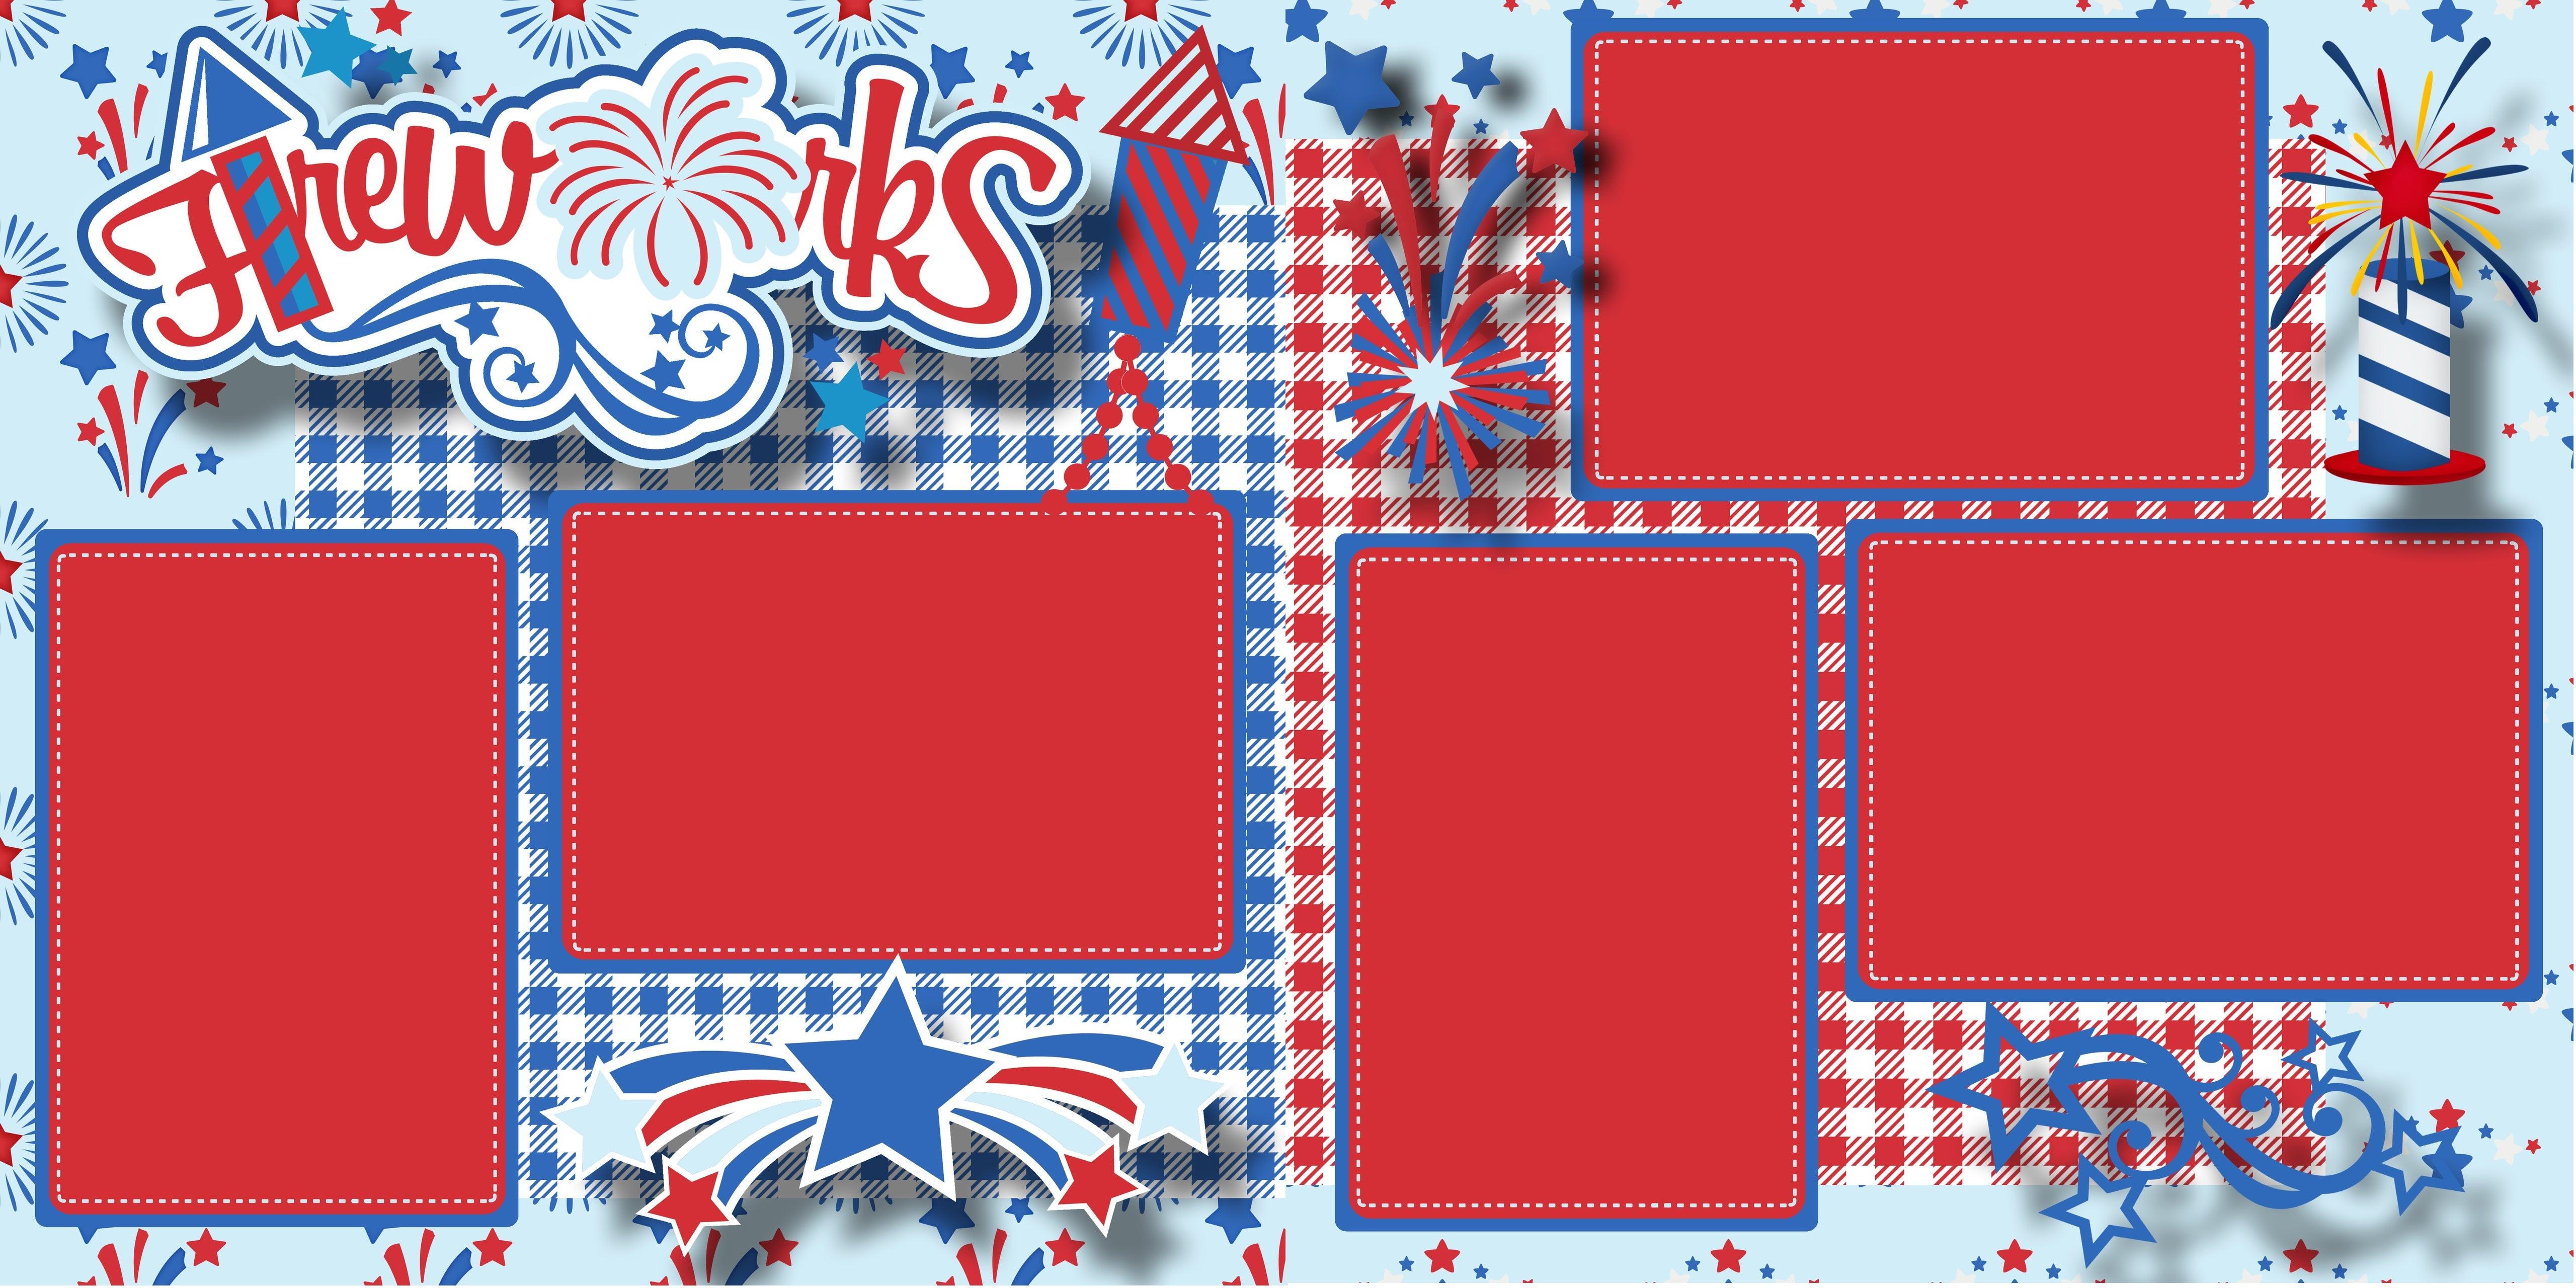 Fireworks (2) - 12 x 12 Premade, Printed Scrapbook Pages by SSC Designs